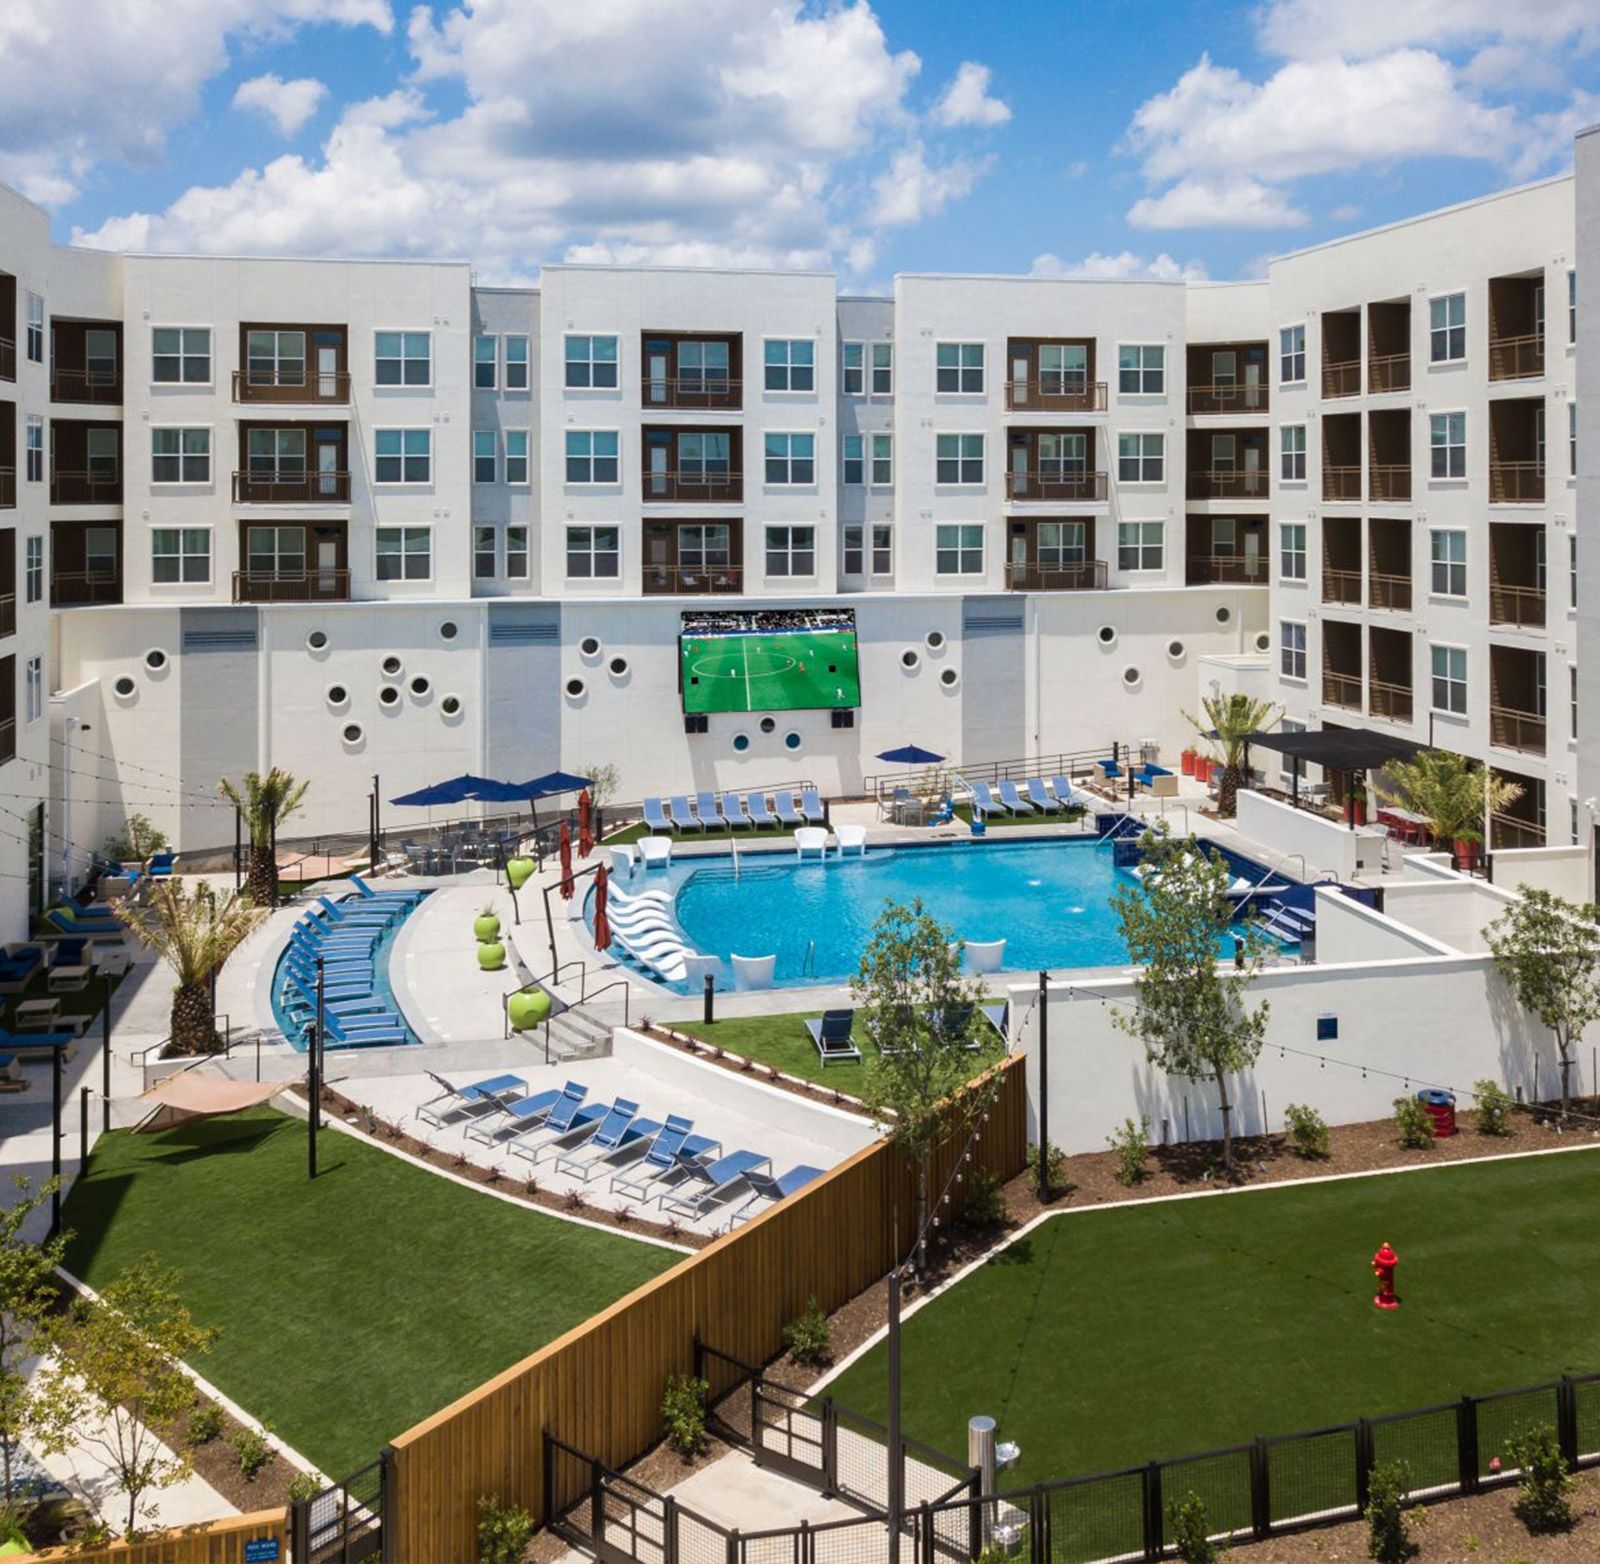 exterior pool and ourdoor space San Marcos student housing